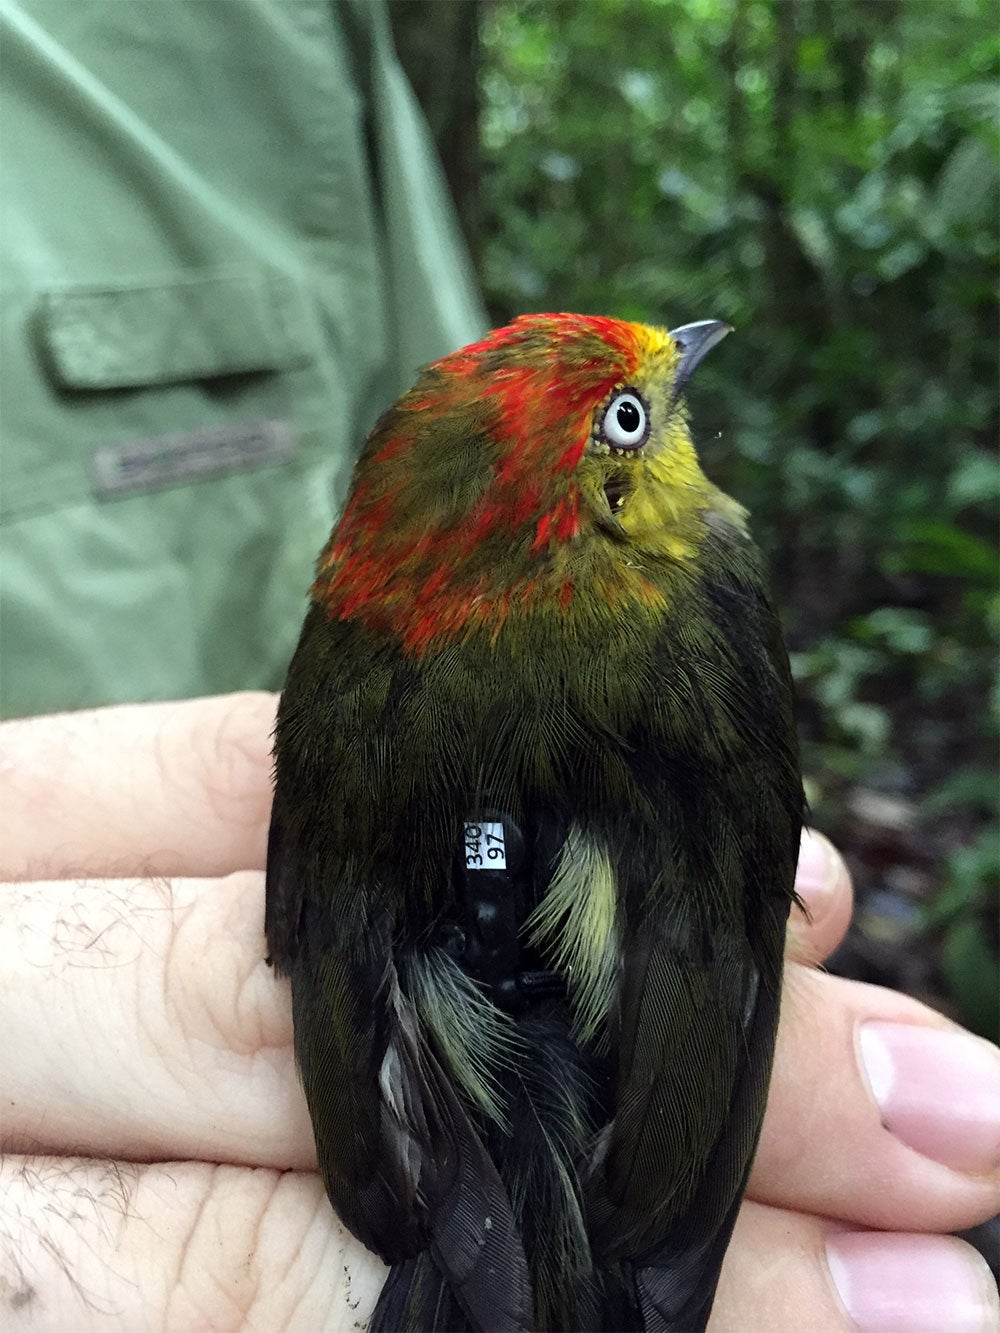 A young male wire-tailed manakin bird fitted with a coded tag for tracking its movement